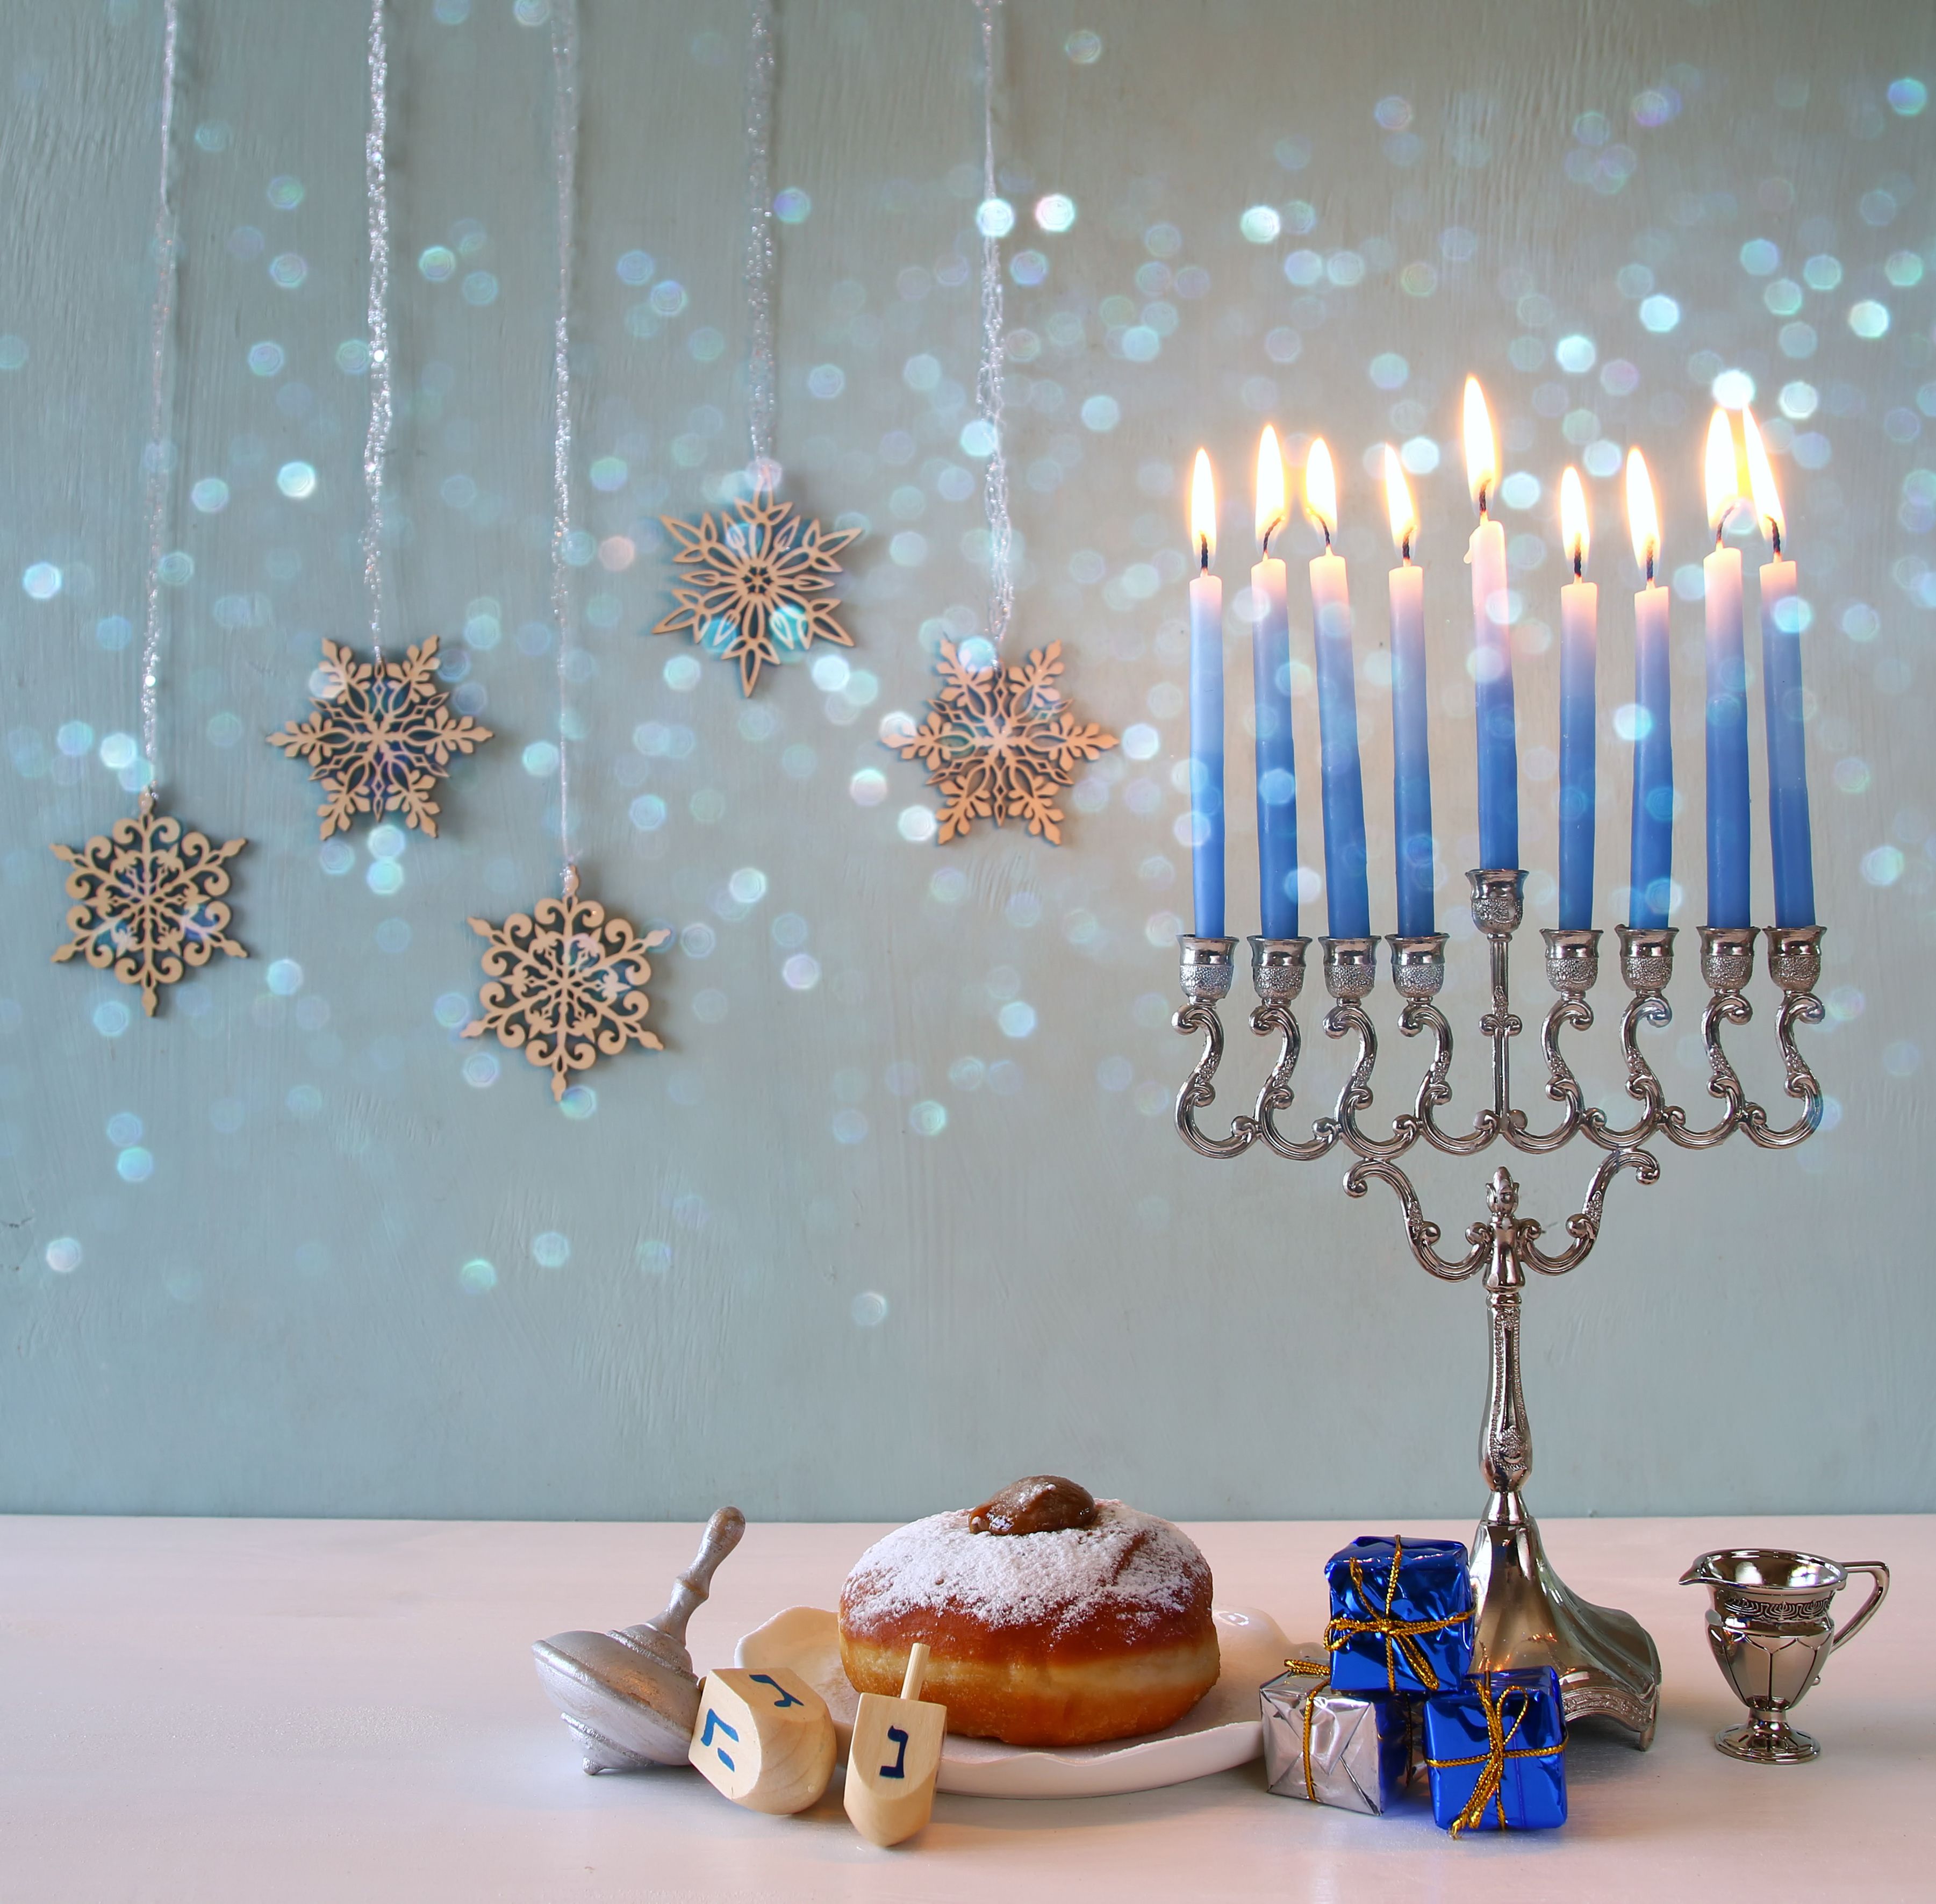 13 Hanukkah Fun Facts What Is Hanukkah The last time hanukkah overlapped with christmas was in 2016, when the first night of the festival took. 13 hanukkah fun facts what is hanukkah